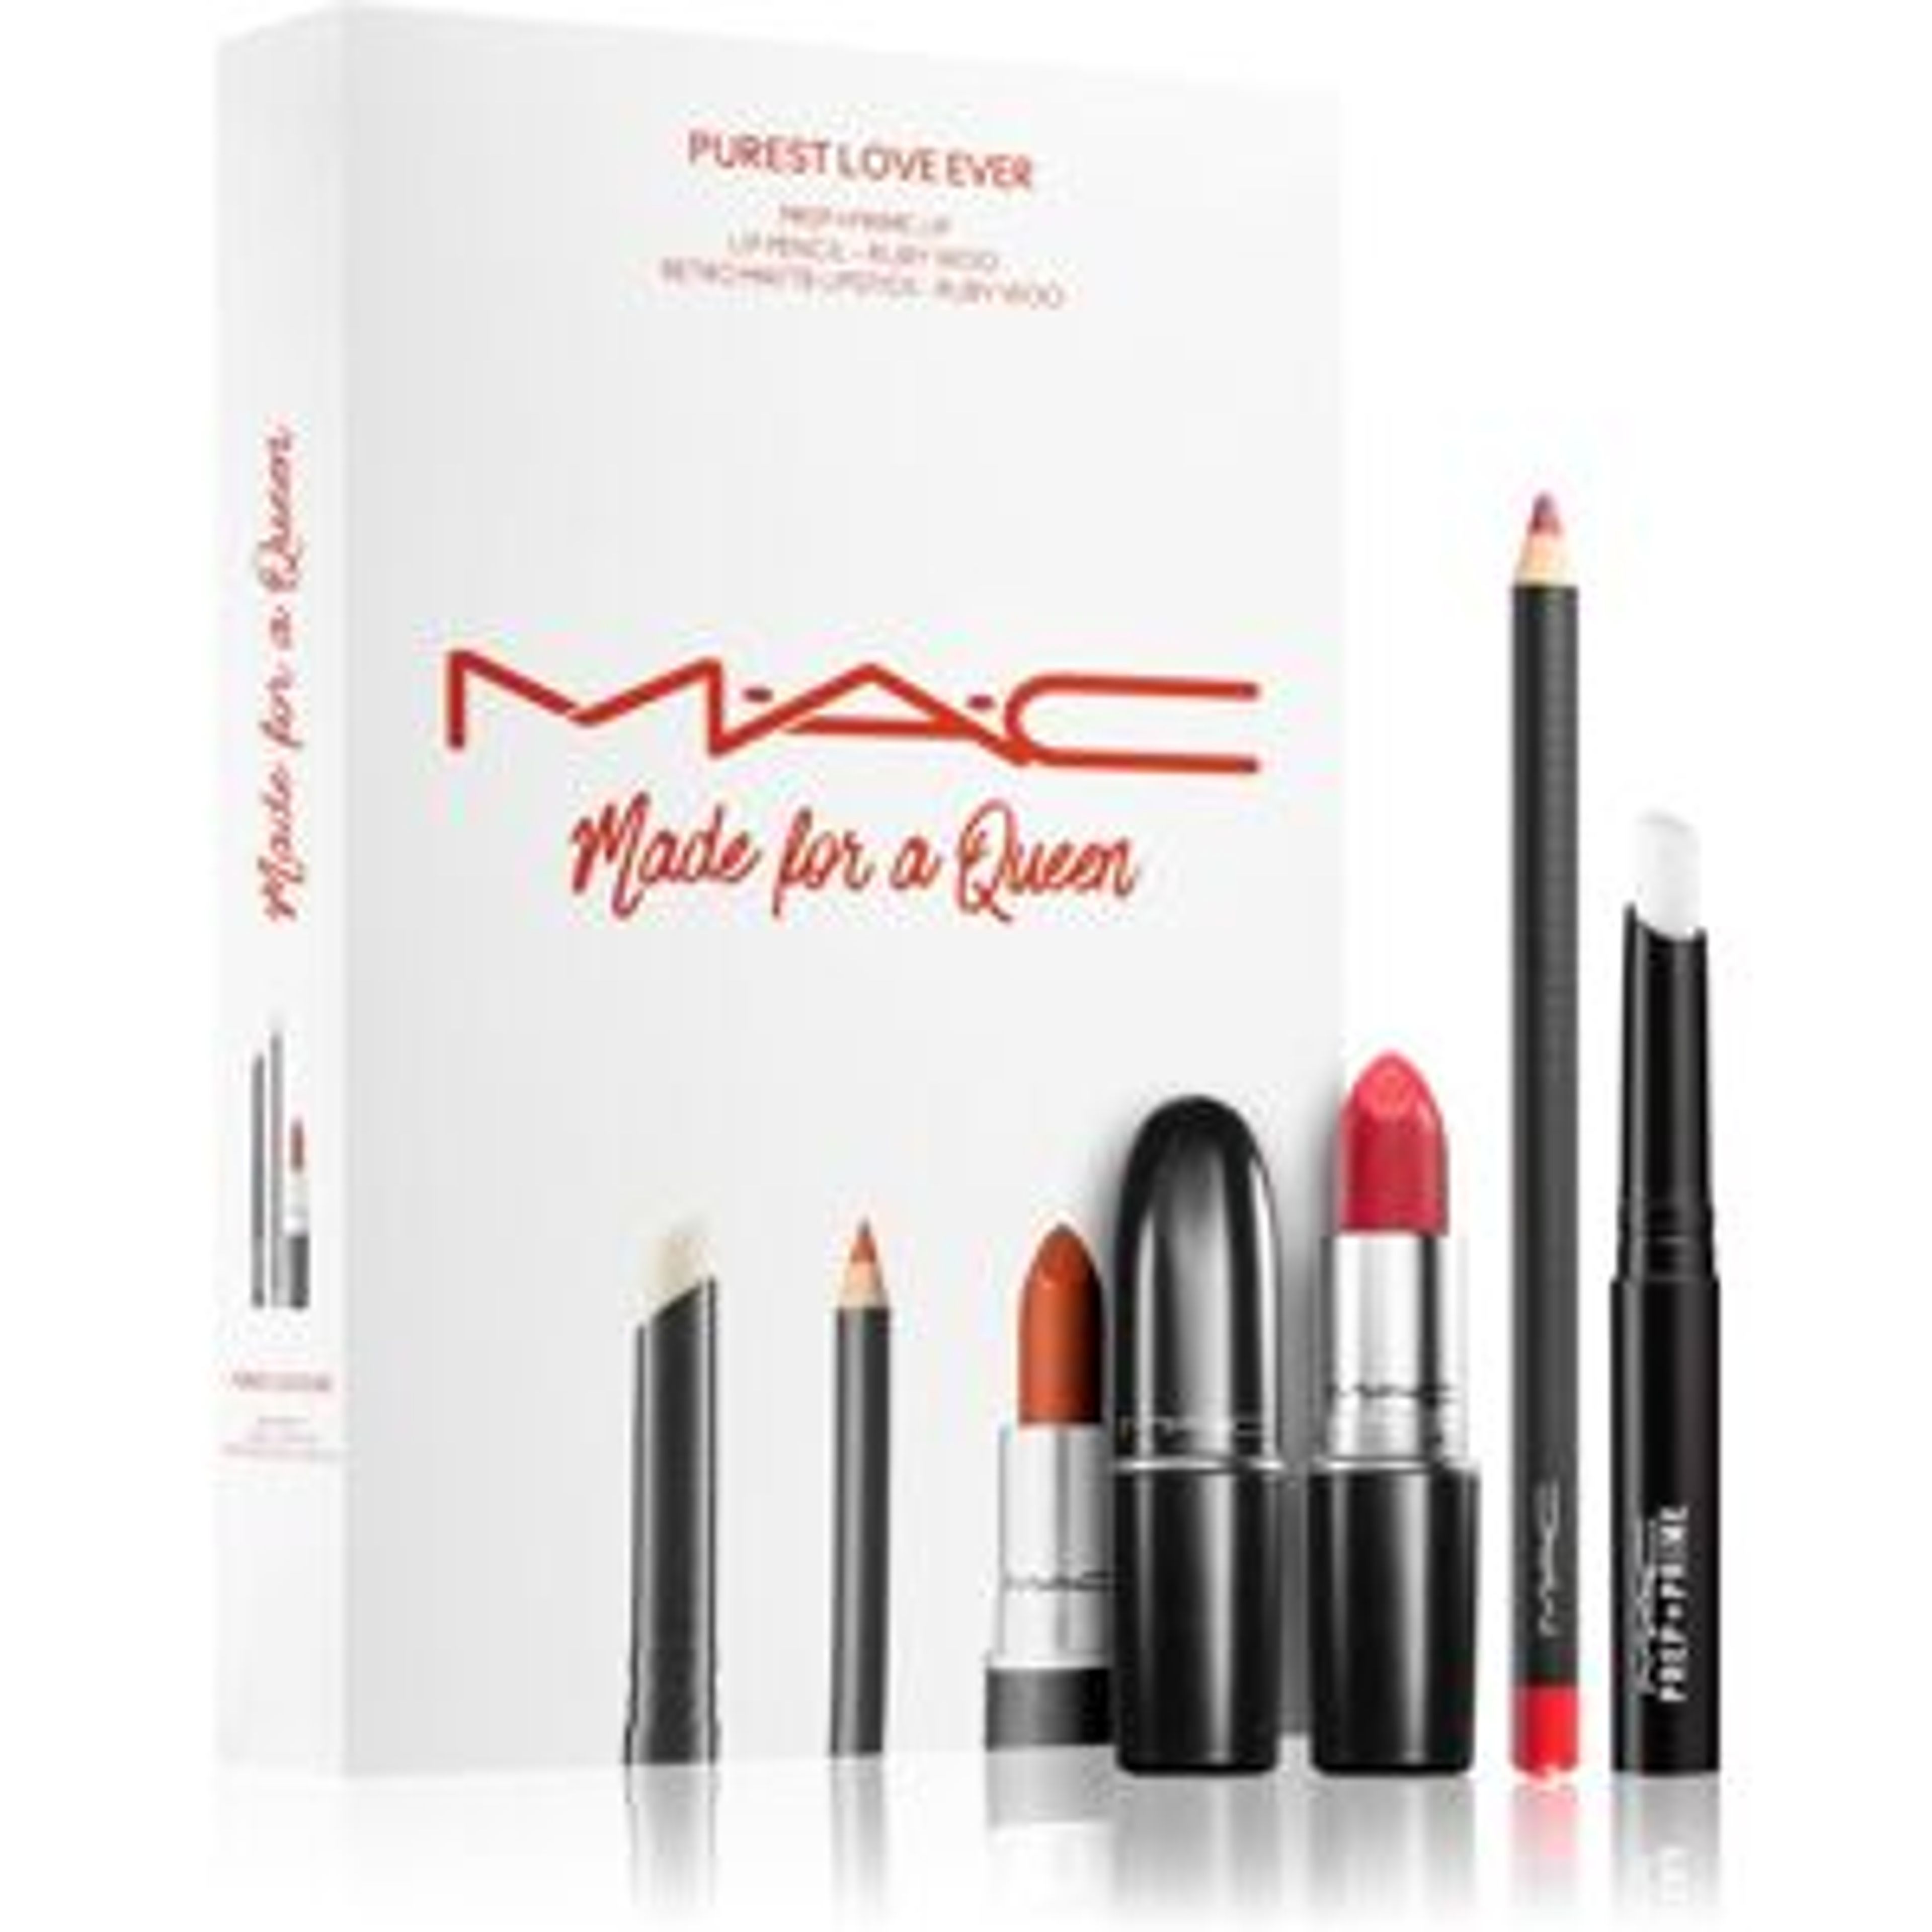 MAC Mac Purest Love Ever Kit - Made For A Queen 1